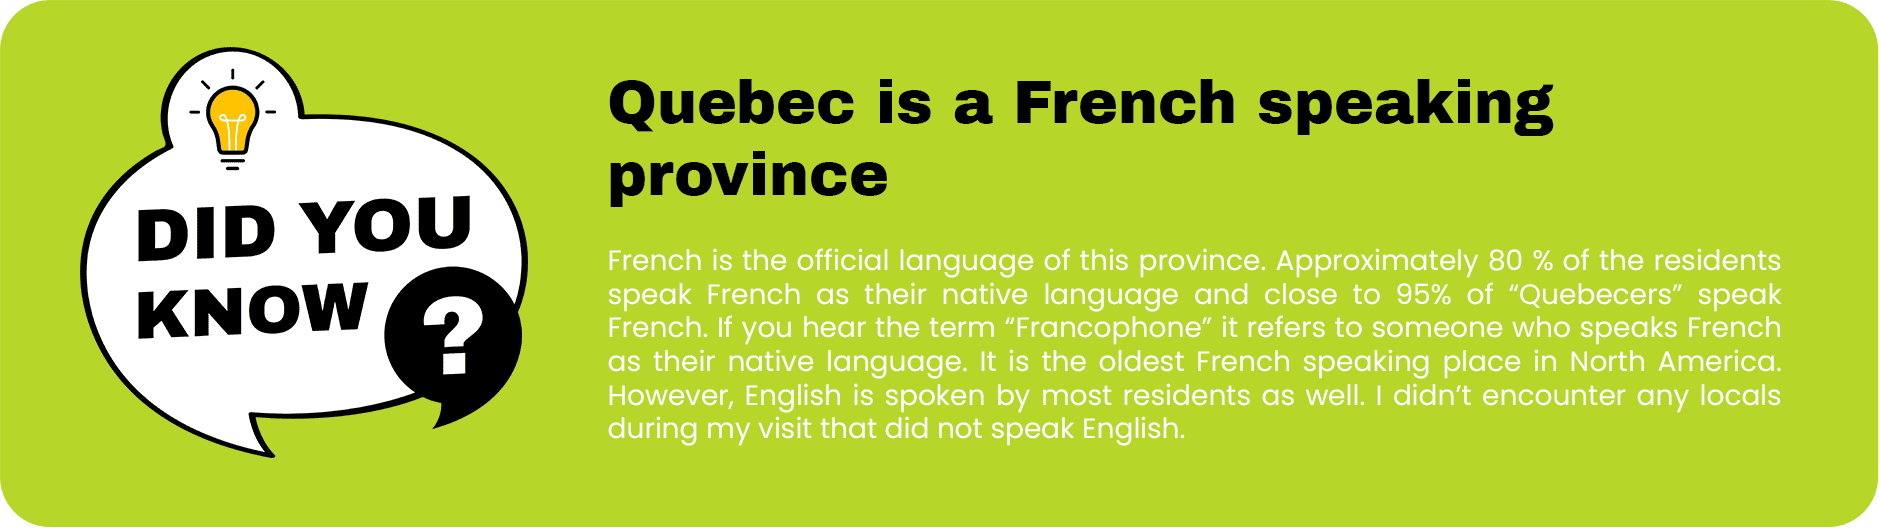 Infographic presenting facts about French being the preferred official language of Quebec and the prevalence of French-speaking residents in the province.